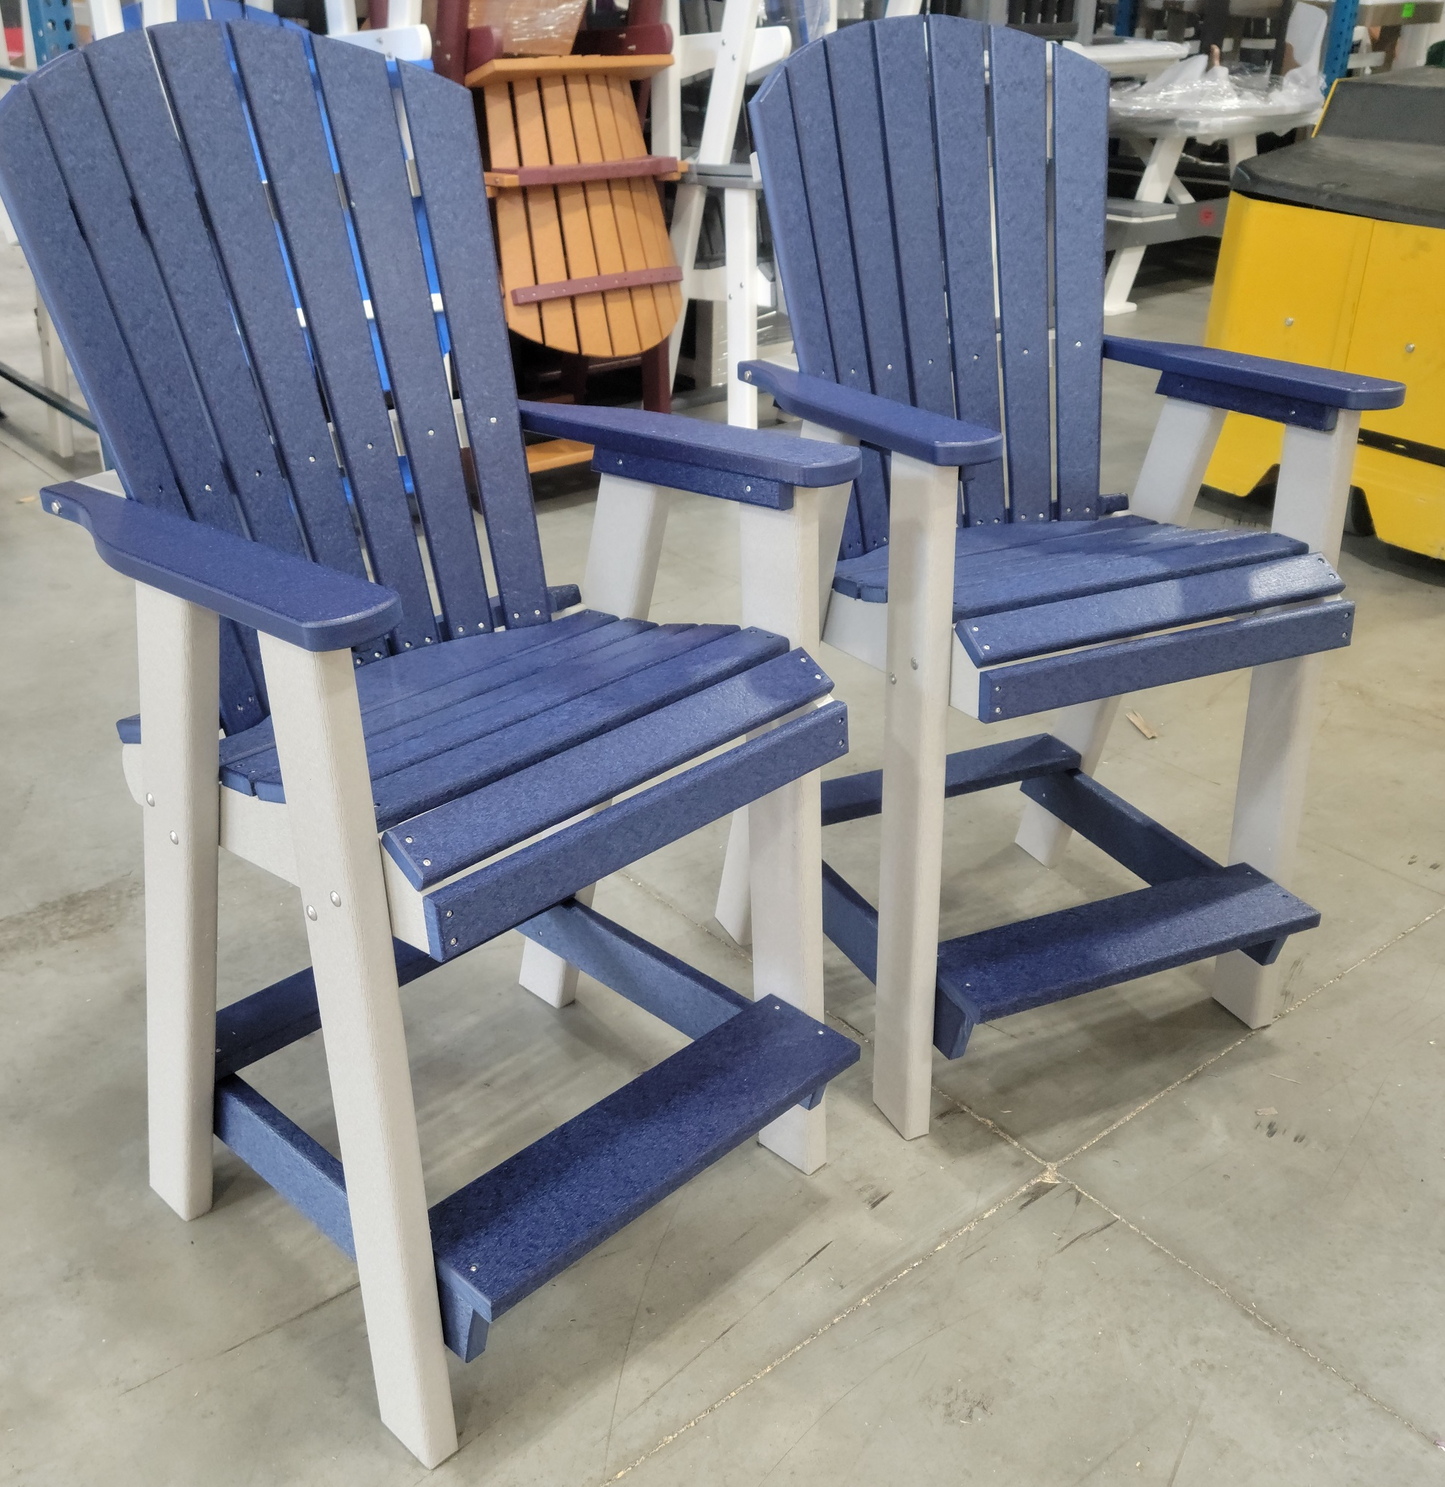 Leisure Lawns Amish Made Recycled Plastic Balcony Chair (Counter Height) Model #321C - LEAD TIME TO SHIP 6 WEEKS OR LESS